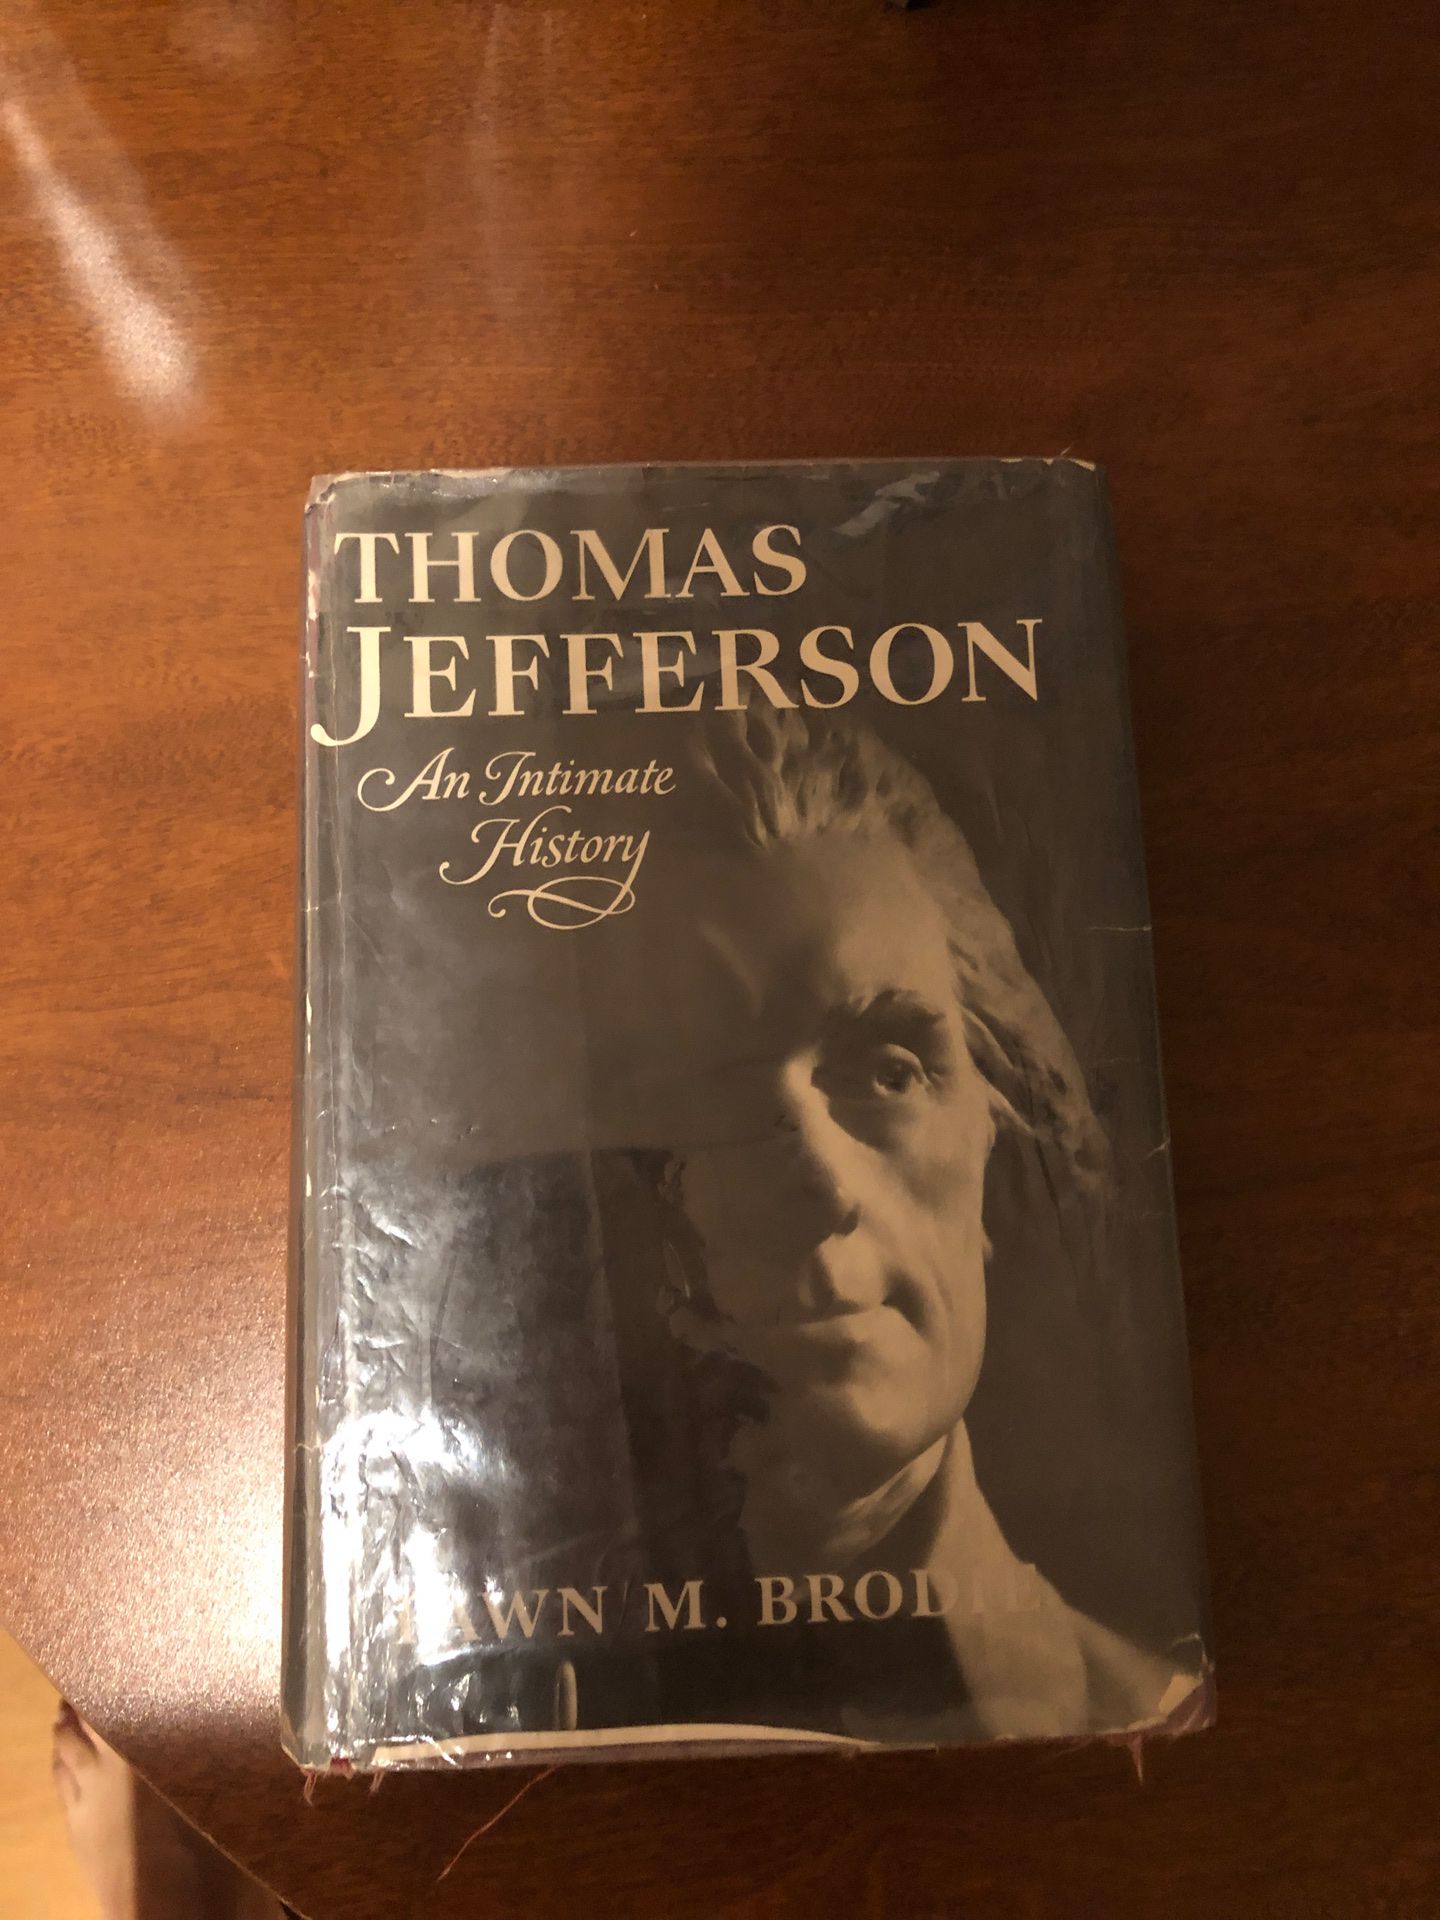 Thomas Jefferson an Intimate History by Fawn M Brodie